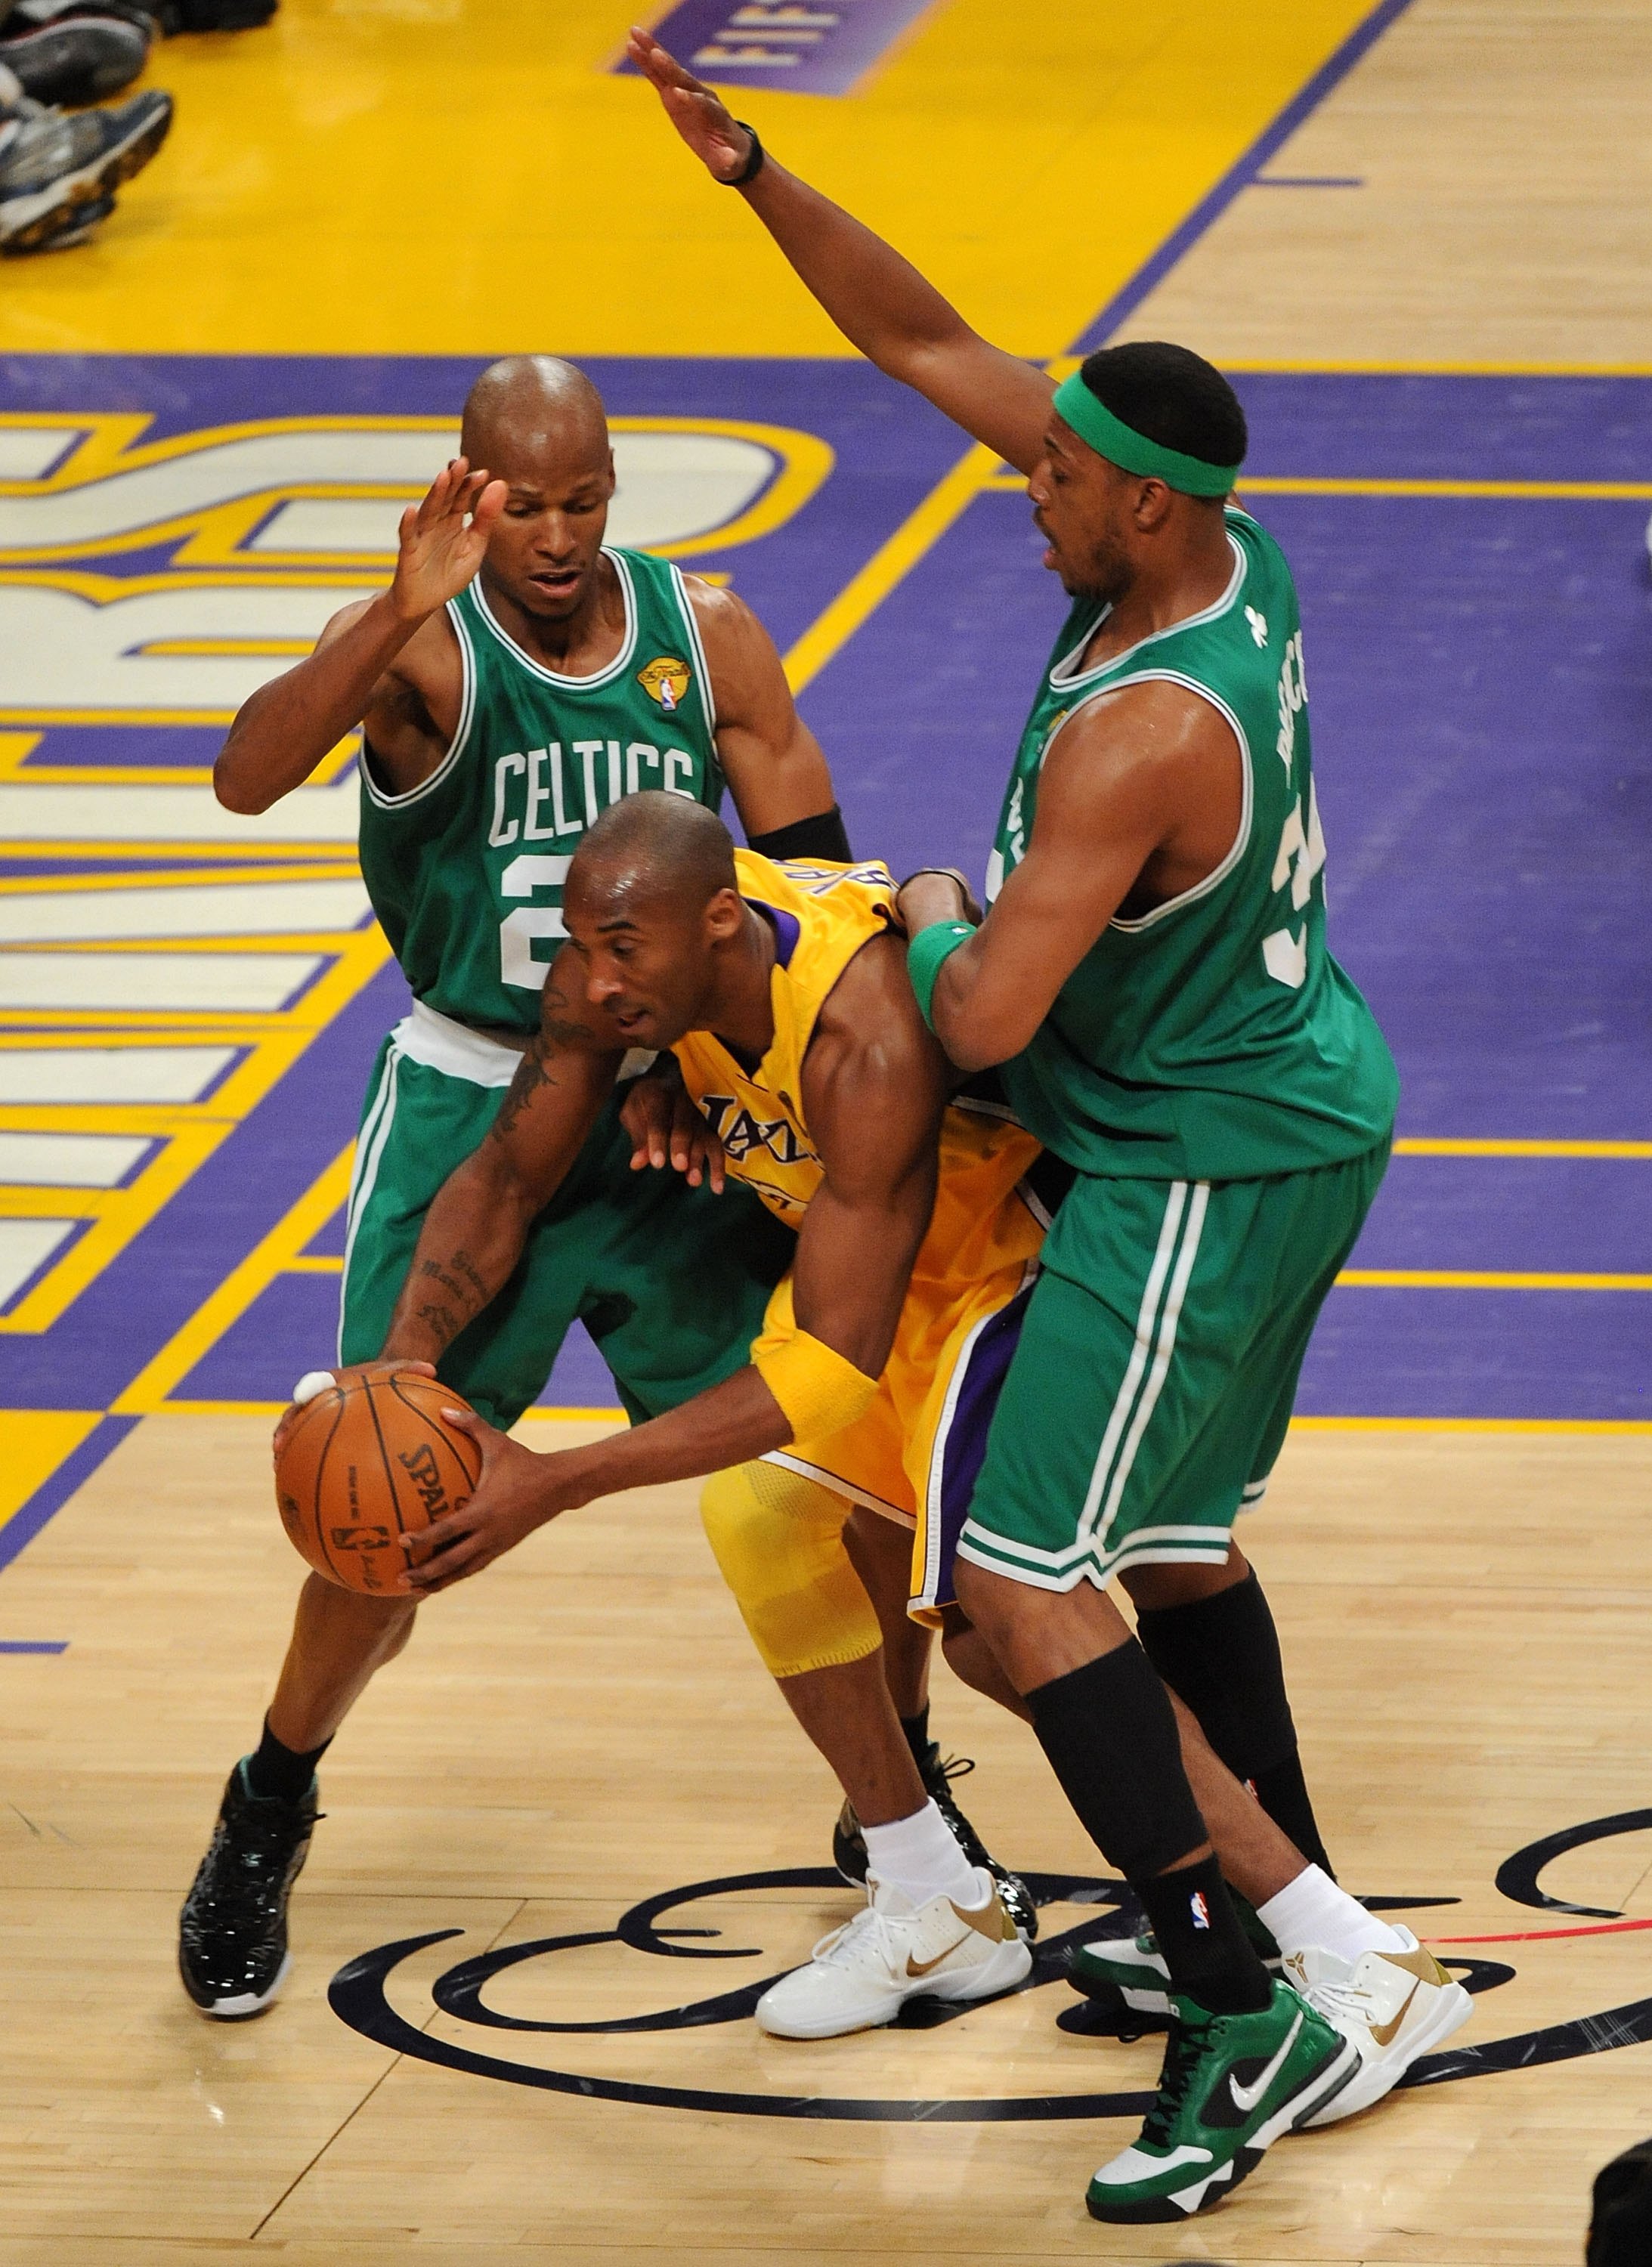 LOS ANGELES, CA - JUNE 17:  Kobe Bryant #24 of the Los Angeles Lakers looks to move the ball as he is double-teammed by Ray Allen #20 and Paul Pierce #34 of the Boston Celtics in Game Seven of the 2010 NBA Finals at Staples Center on June 17, 2010 in Los